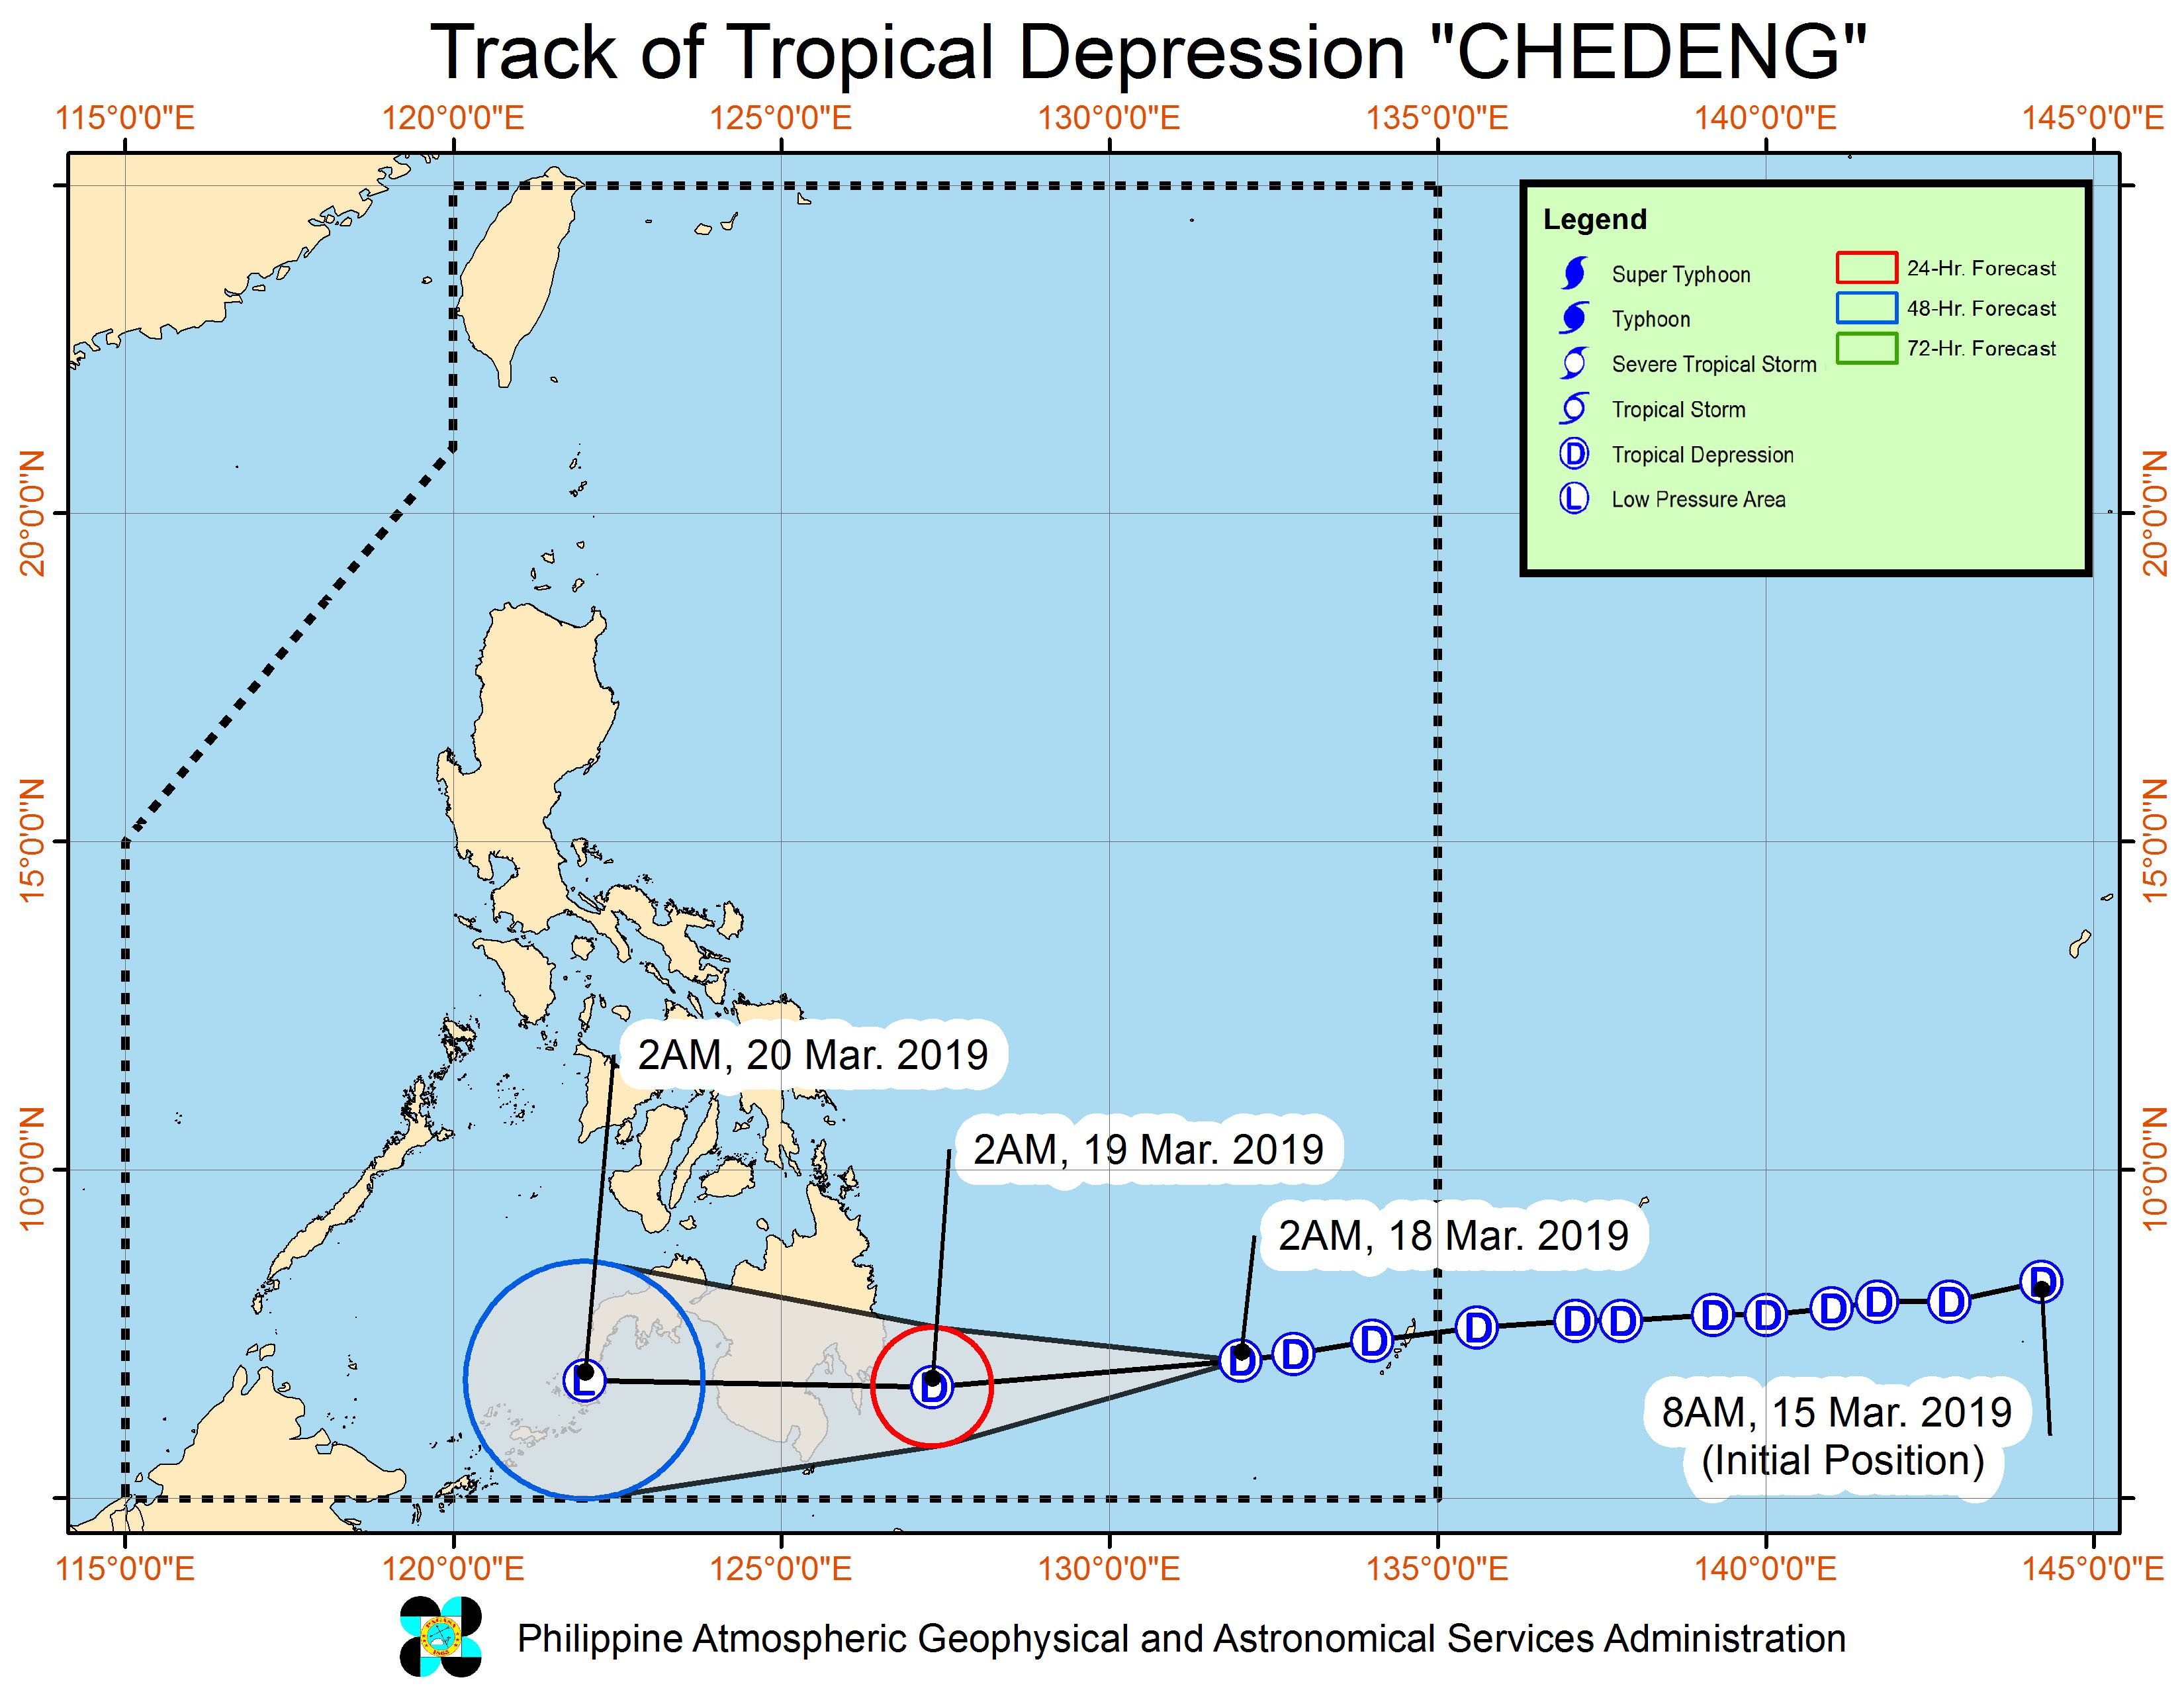 Forecast track of Tropical Depression Chedeng as of March 18, 2019, 5 am. Image from PAGASA 